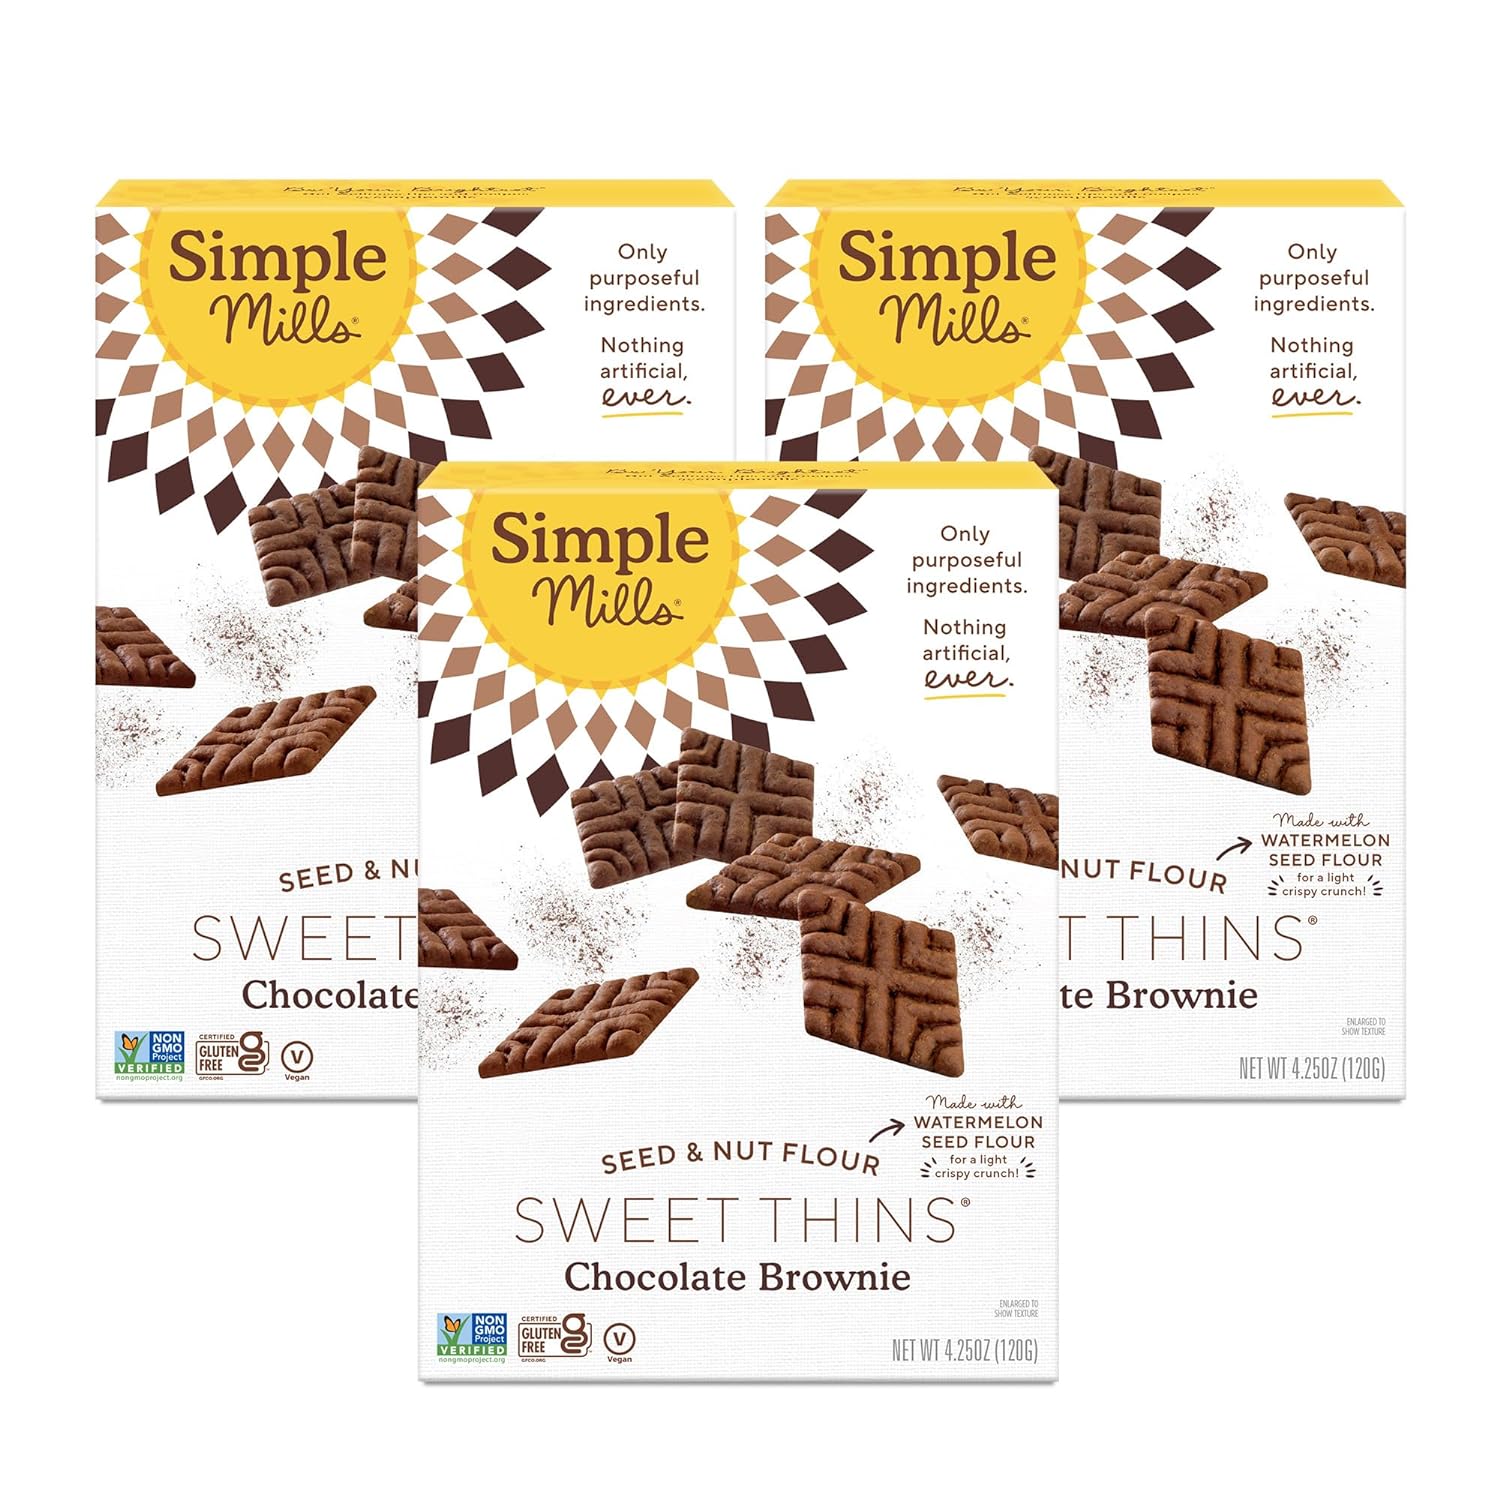 Simple Mills Sweet Thins Cookies, Seed and Nut Flour, Chocolate Brownie - Gluten Free, Paleo Friendly, Healthy Snacks, 4.25 Ounce (Pack of 3)